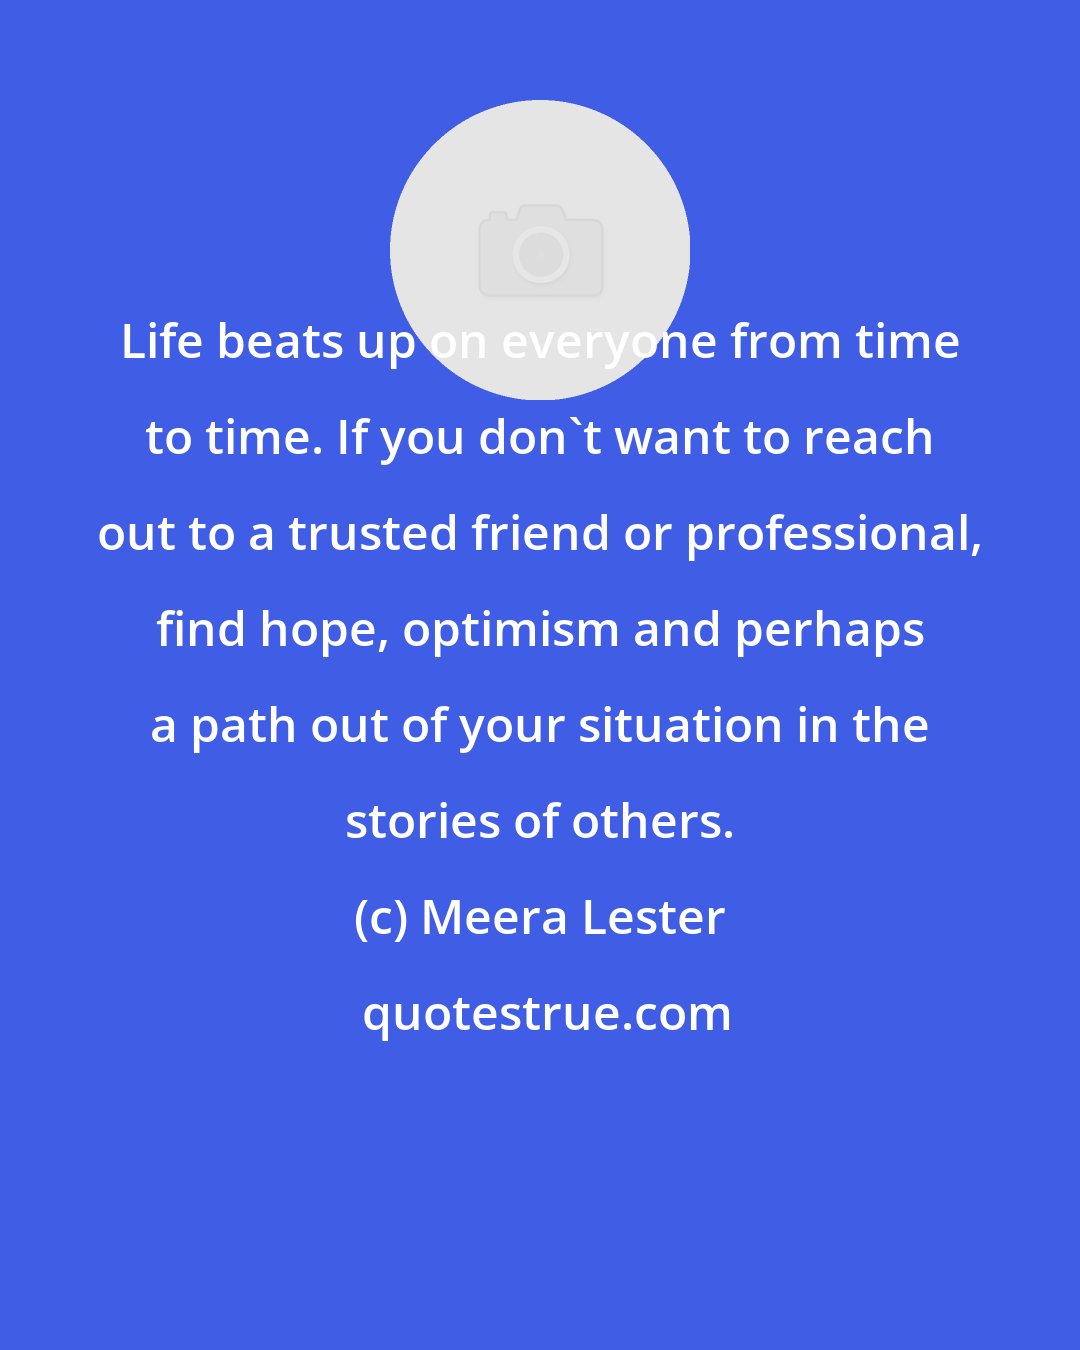 Meera Lester: Life beats up on everyone from time to time. If you don't want to reach out to a trusted friend or professional, find hope, optimism and perhaps a path out of your situation in the stories of others.